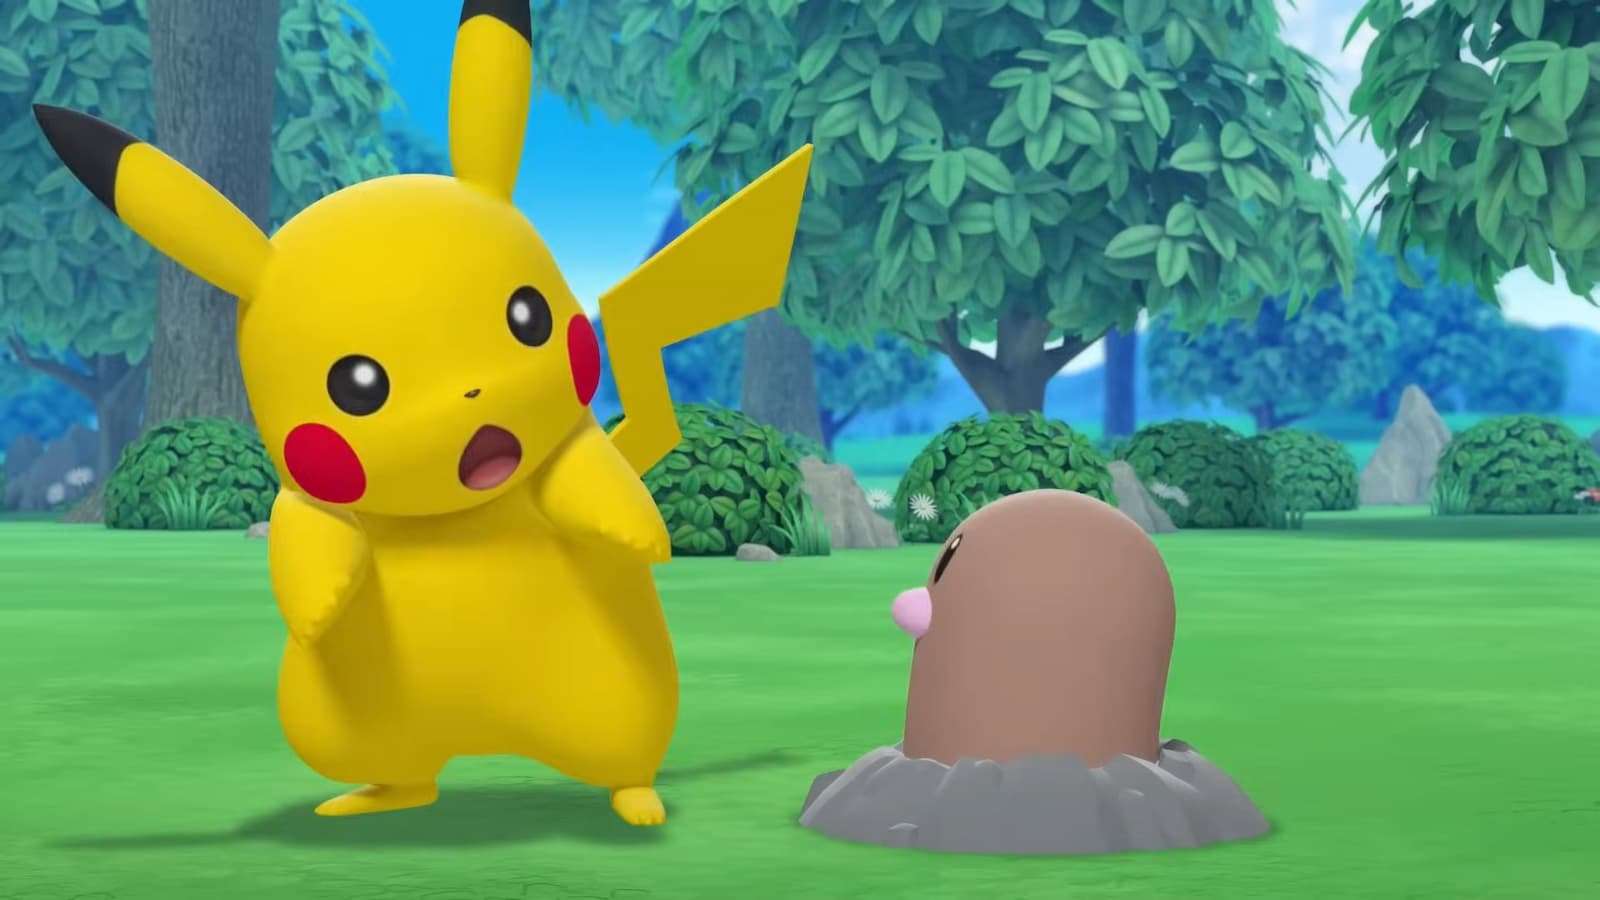 Pikachu and Diglett playing hide and seek in Pokemon anime short